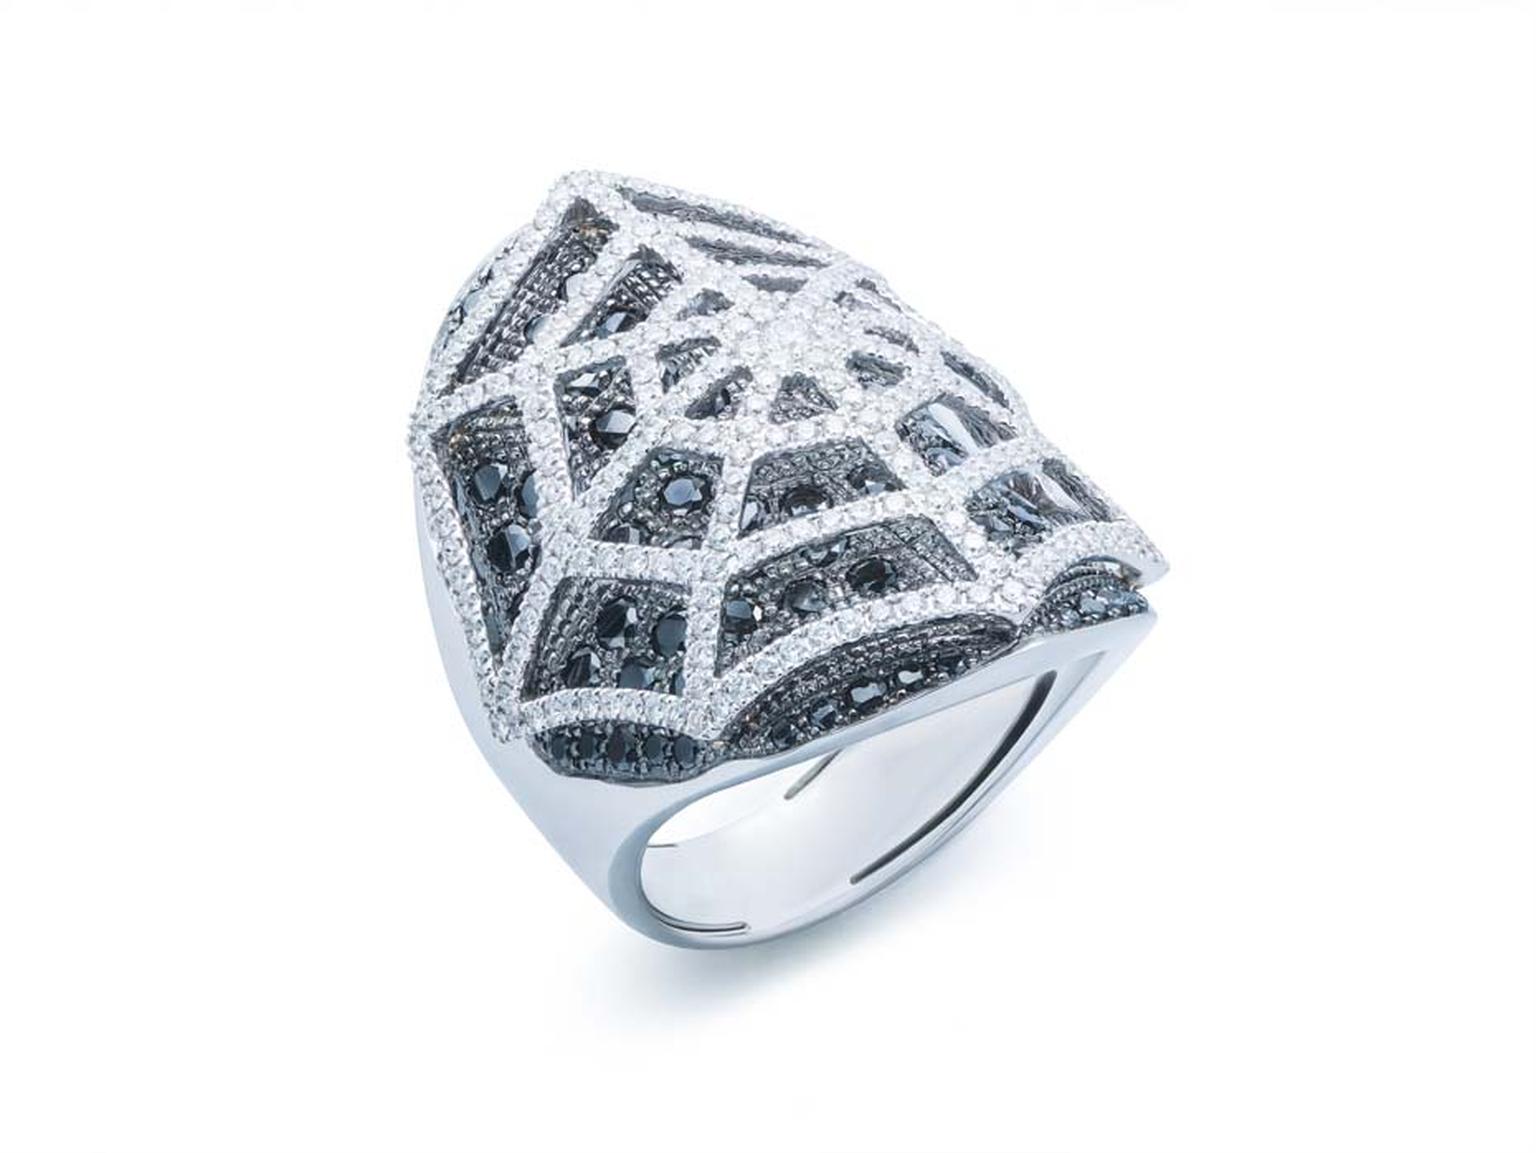 Damian by Mischelle Spiderweb ring with black and white diamonds